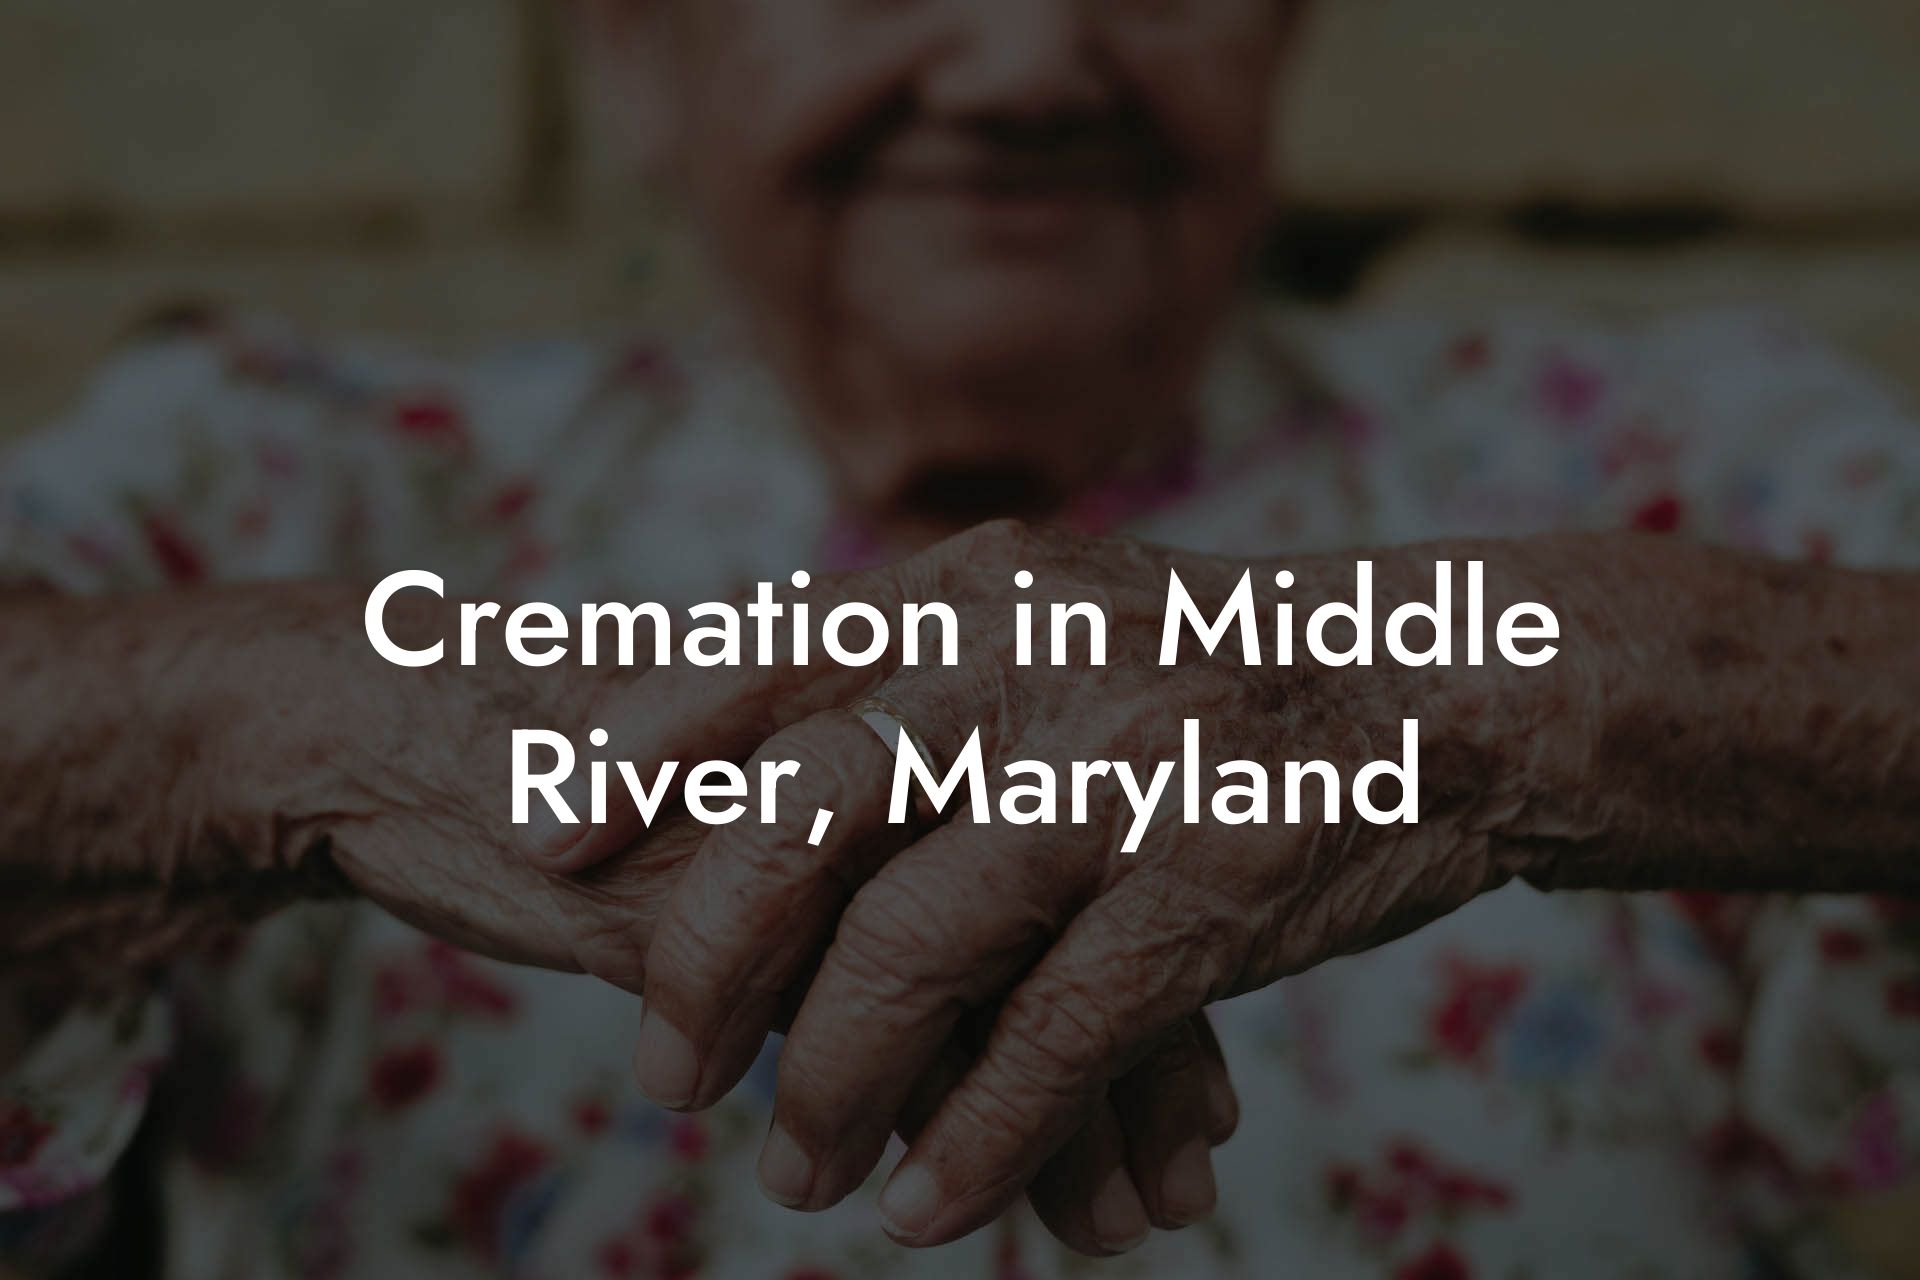 Cremation in Middle River, Maryland